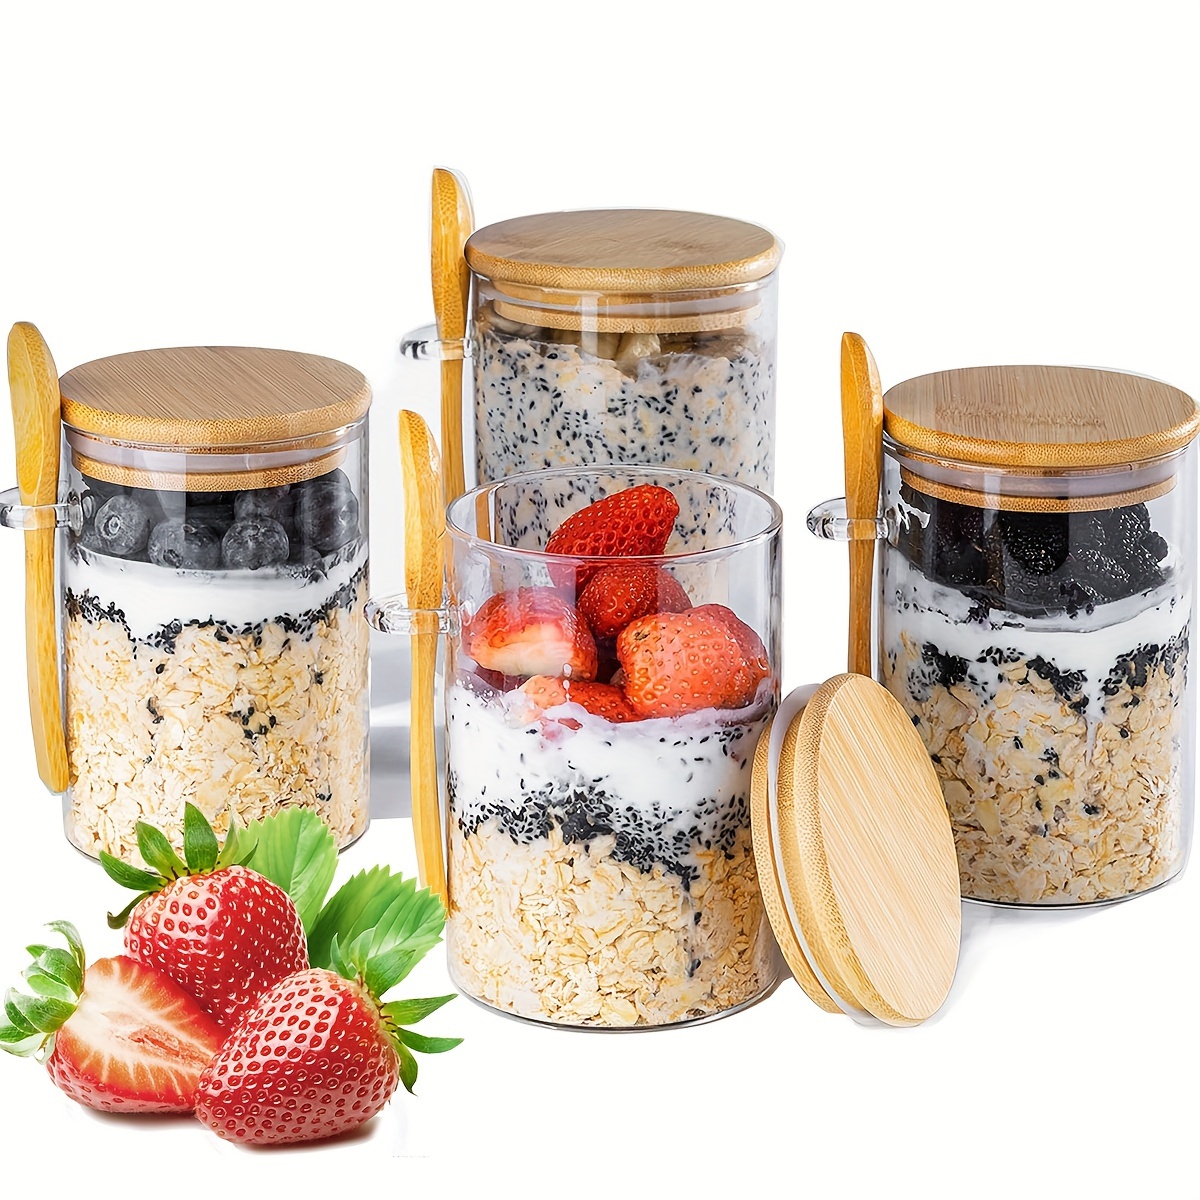 

16oz Oatmeal Cup, Salad Cup, Oatmeal Jar, Oatmeal Cup, Meal Preparation Container, With Lid And Spoon, Glass Jar, Can Hold Chia Seeds, Pudding, Yogurt, Salad, Oatmeal